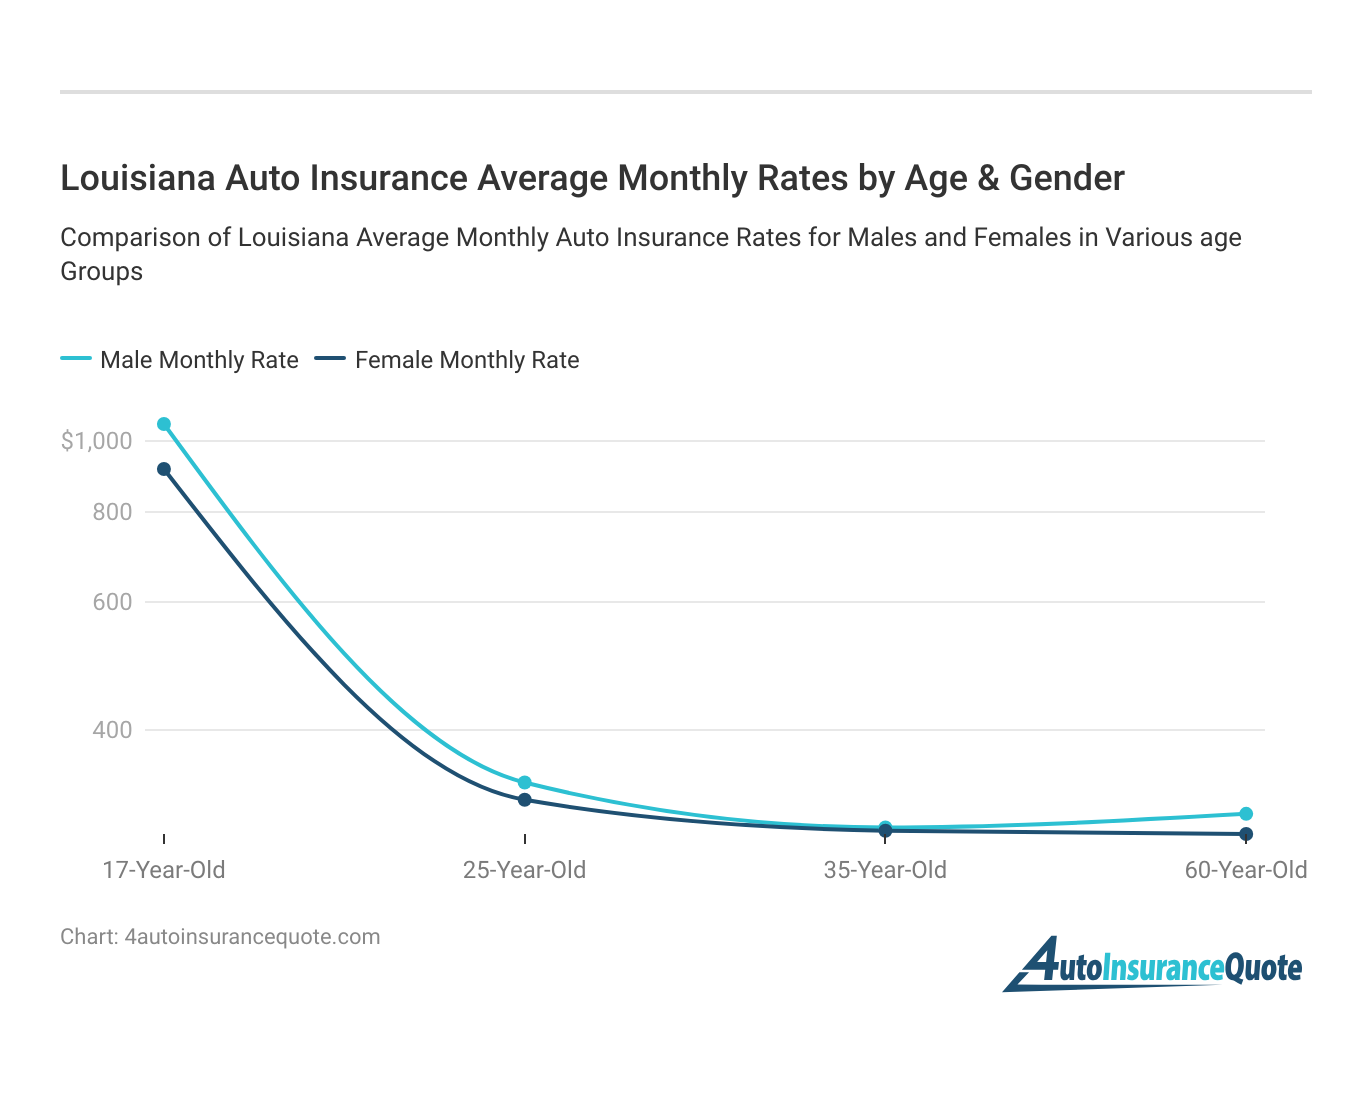 <h3>Louisiana Auto Insurance Average Monthly Rates by Age & Gender</h3>